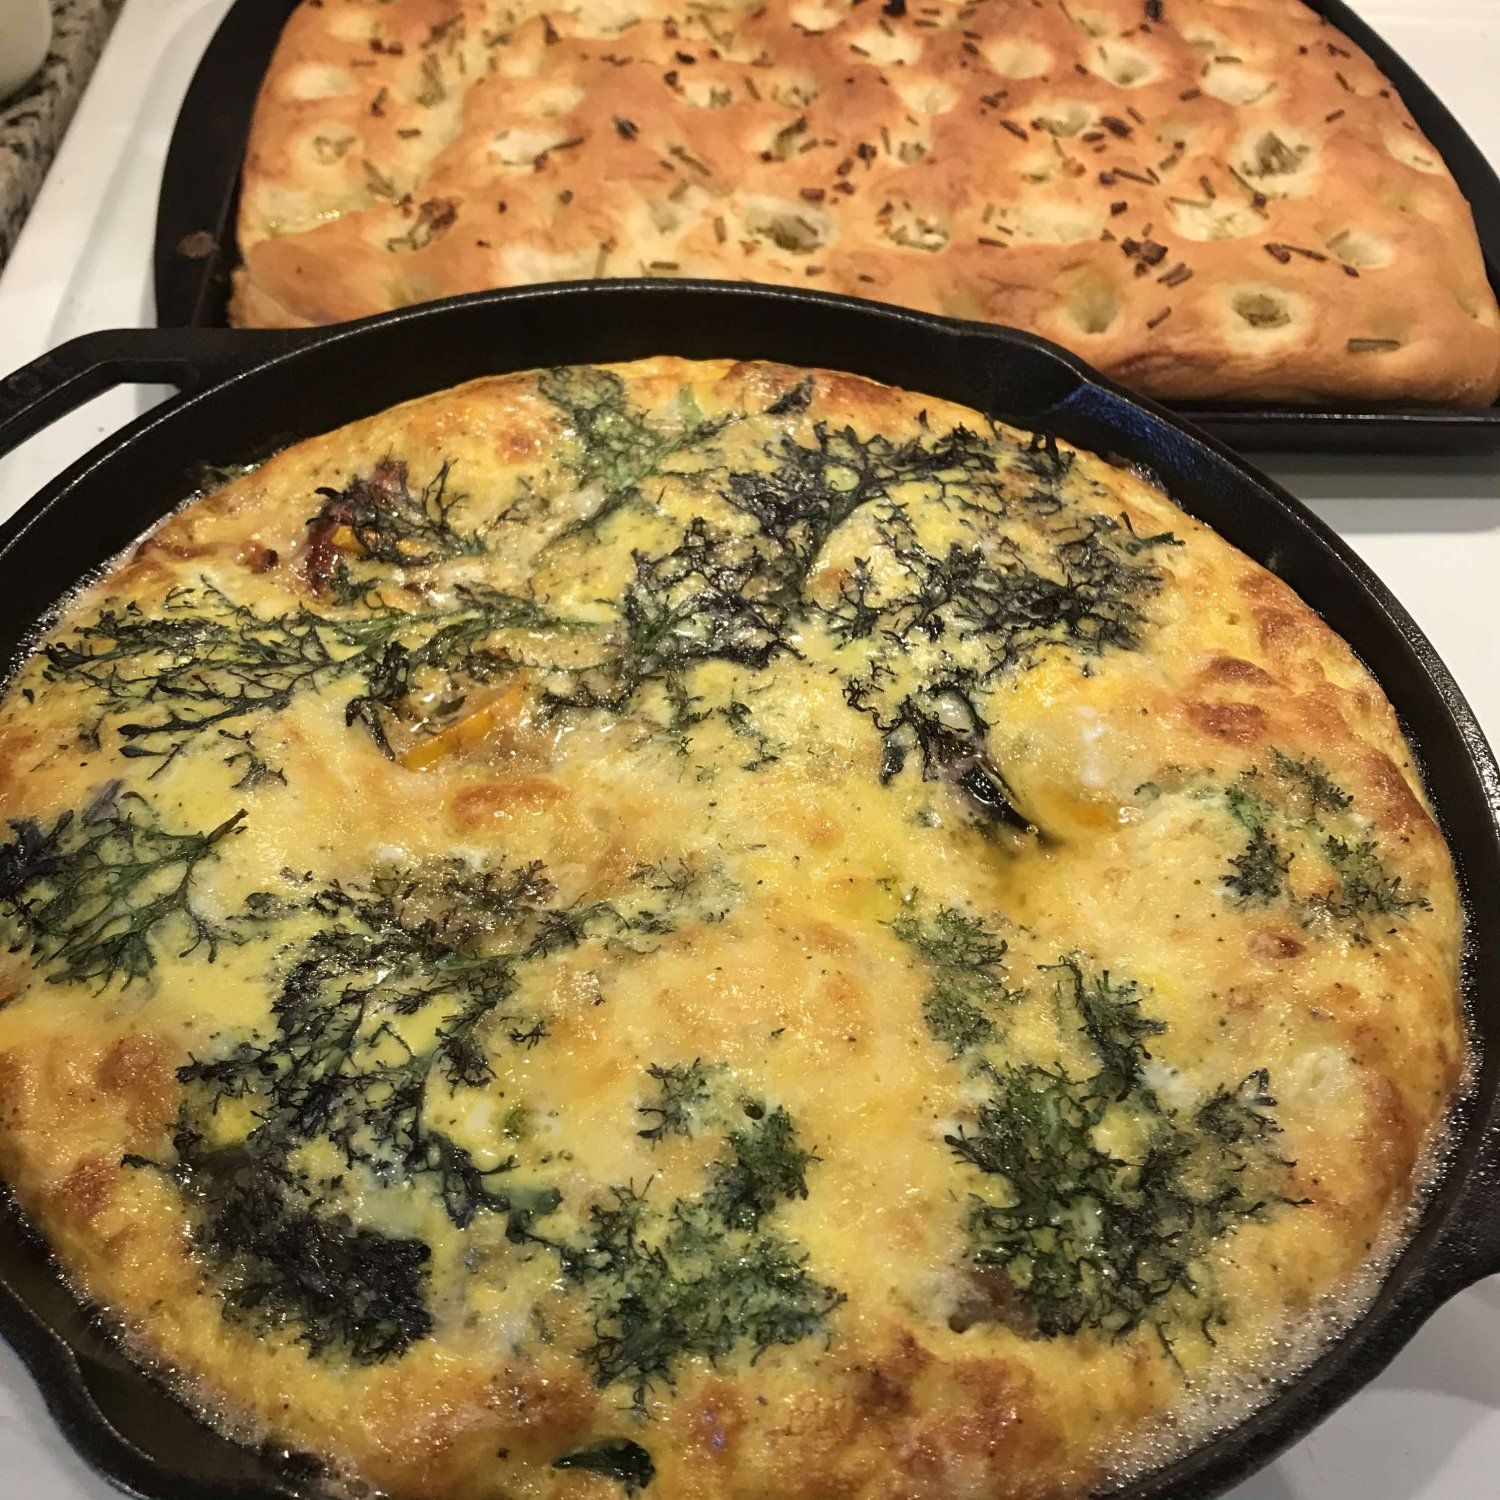 Previous Happening: Last Spring Share, A frittata and kimchi?